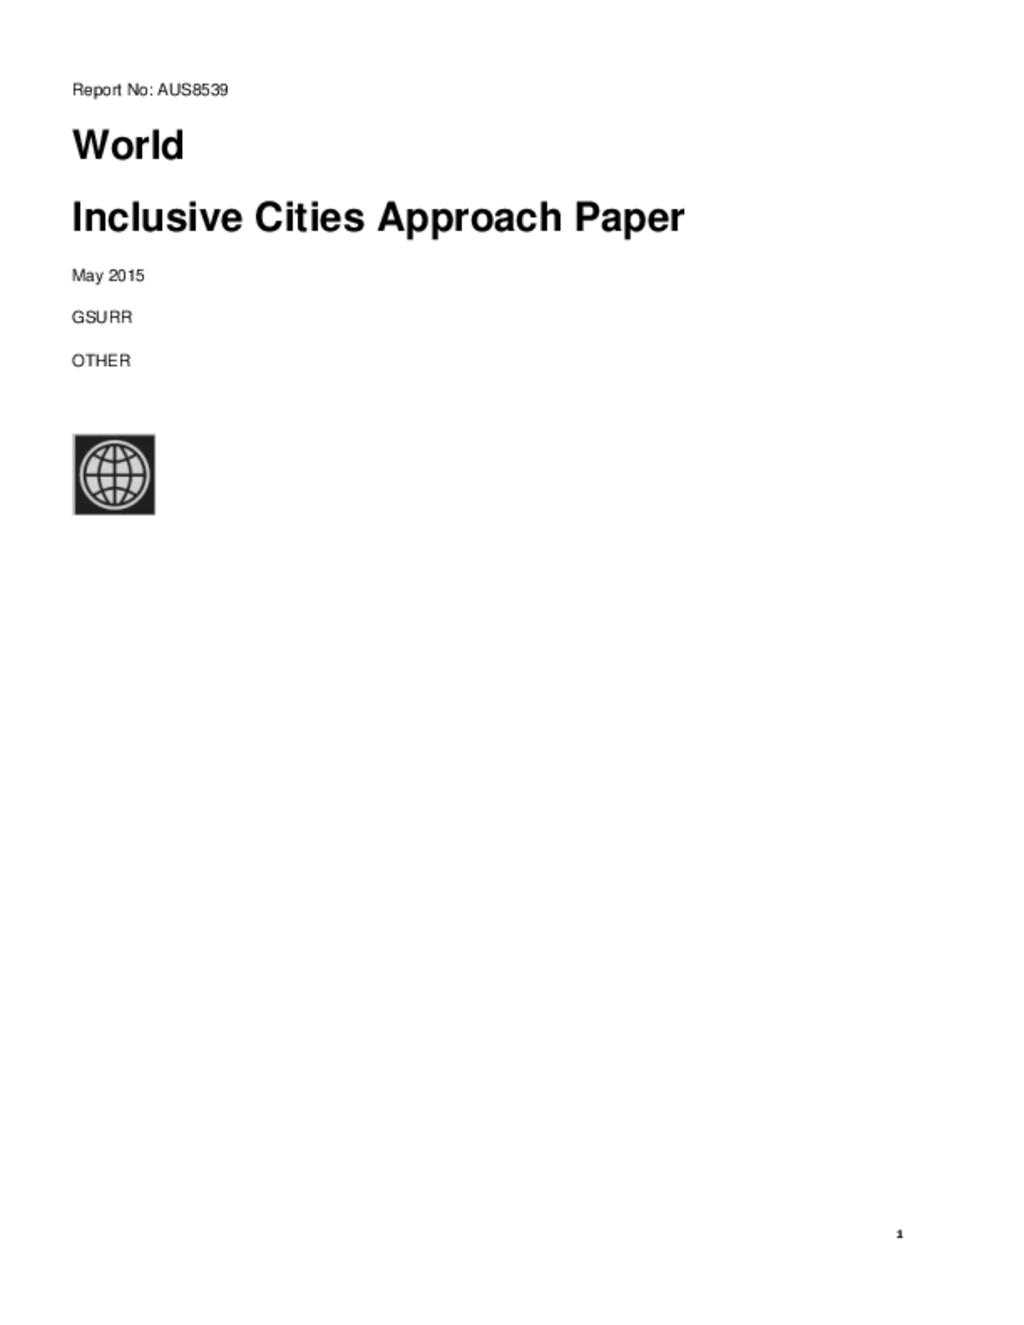 Inclusive Cities Approach Paper